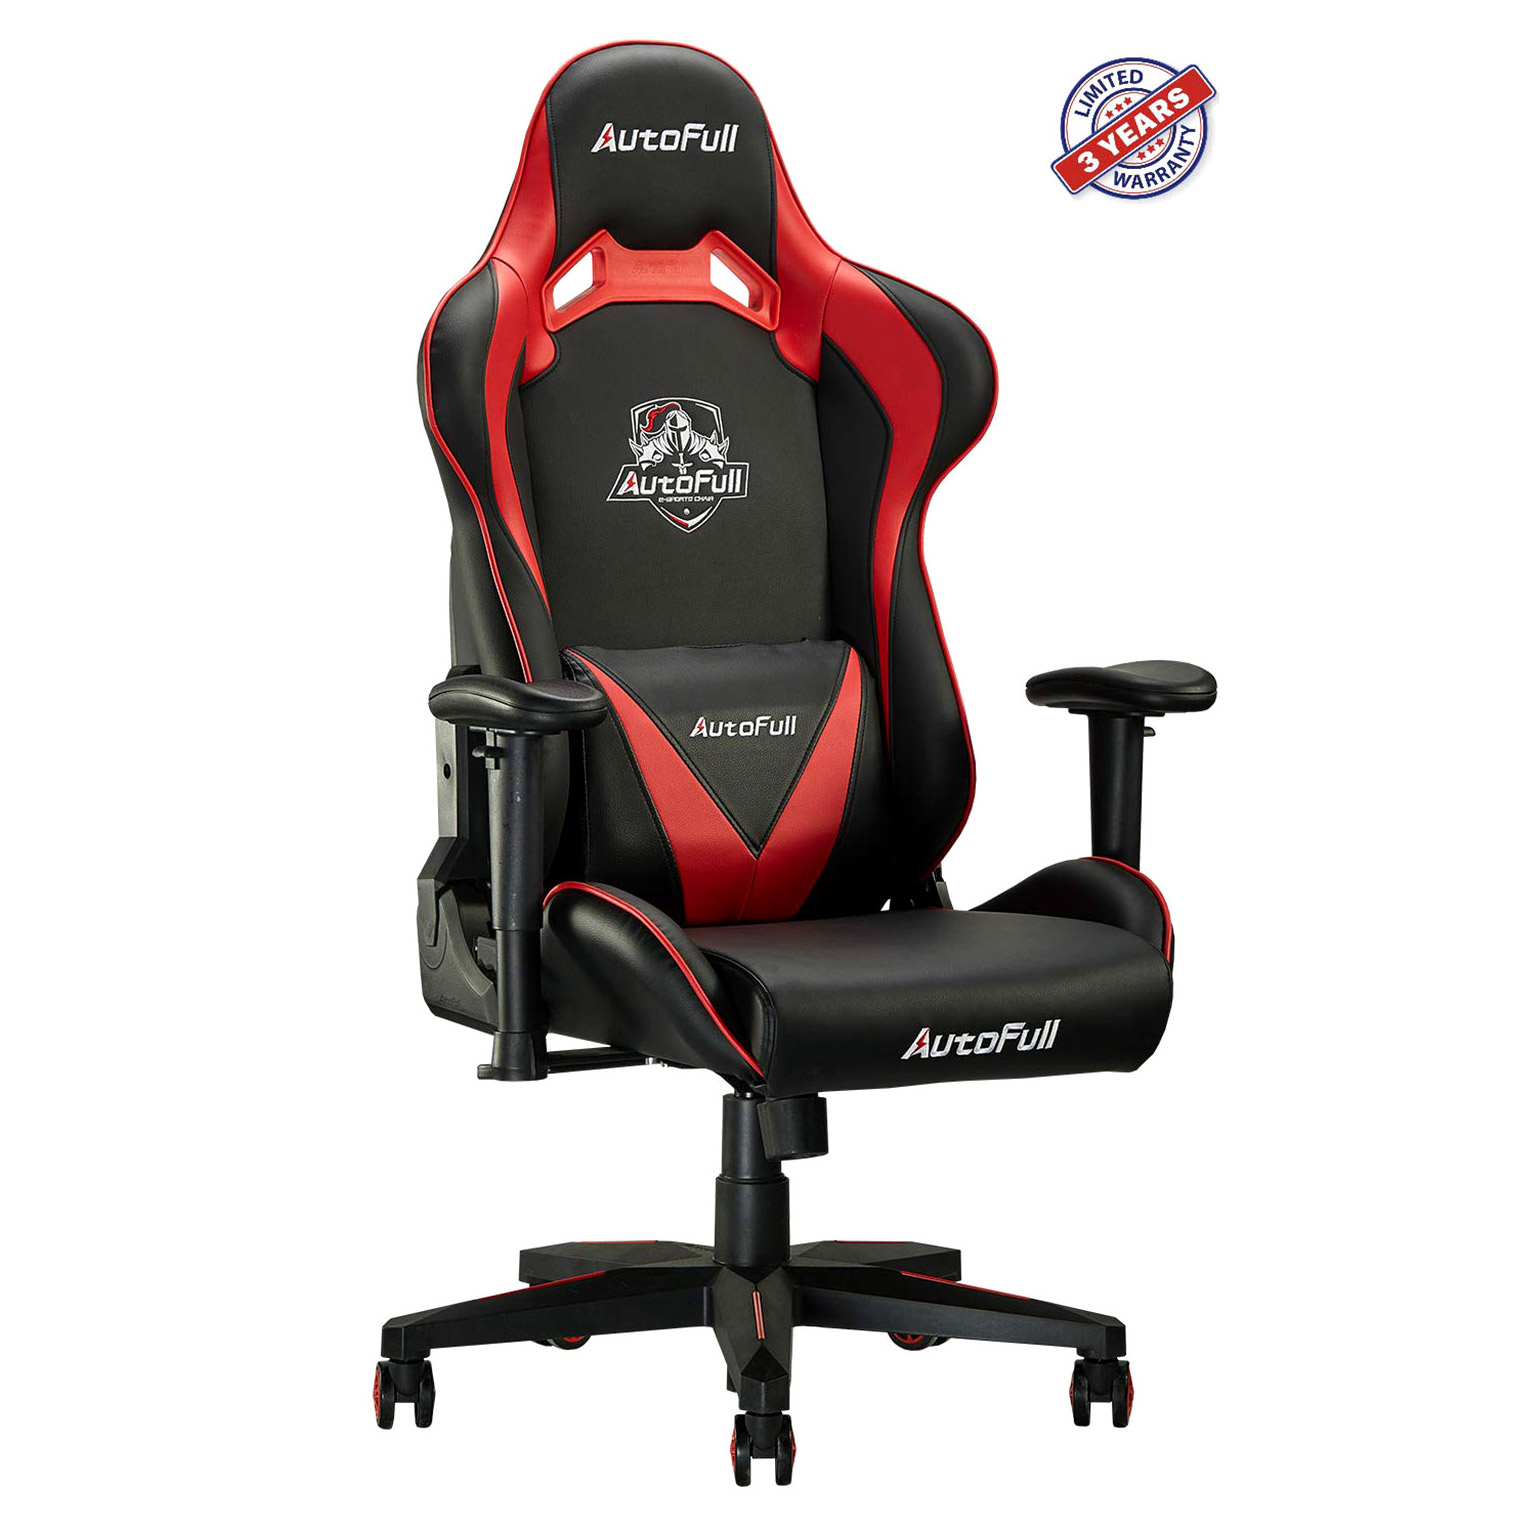 Authorized Brands Autofull Gaming Chair On Bzfuture Autofull Af063bpu Gaming Chair